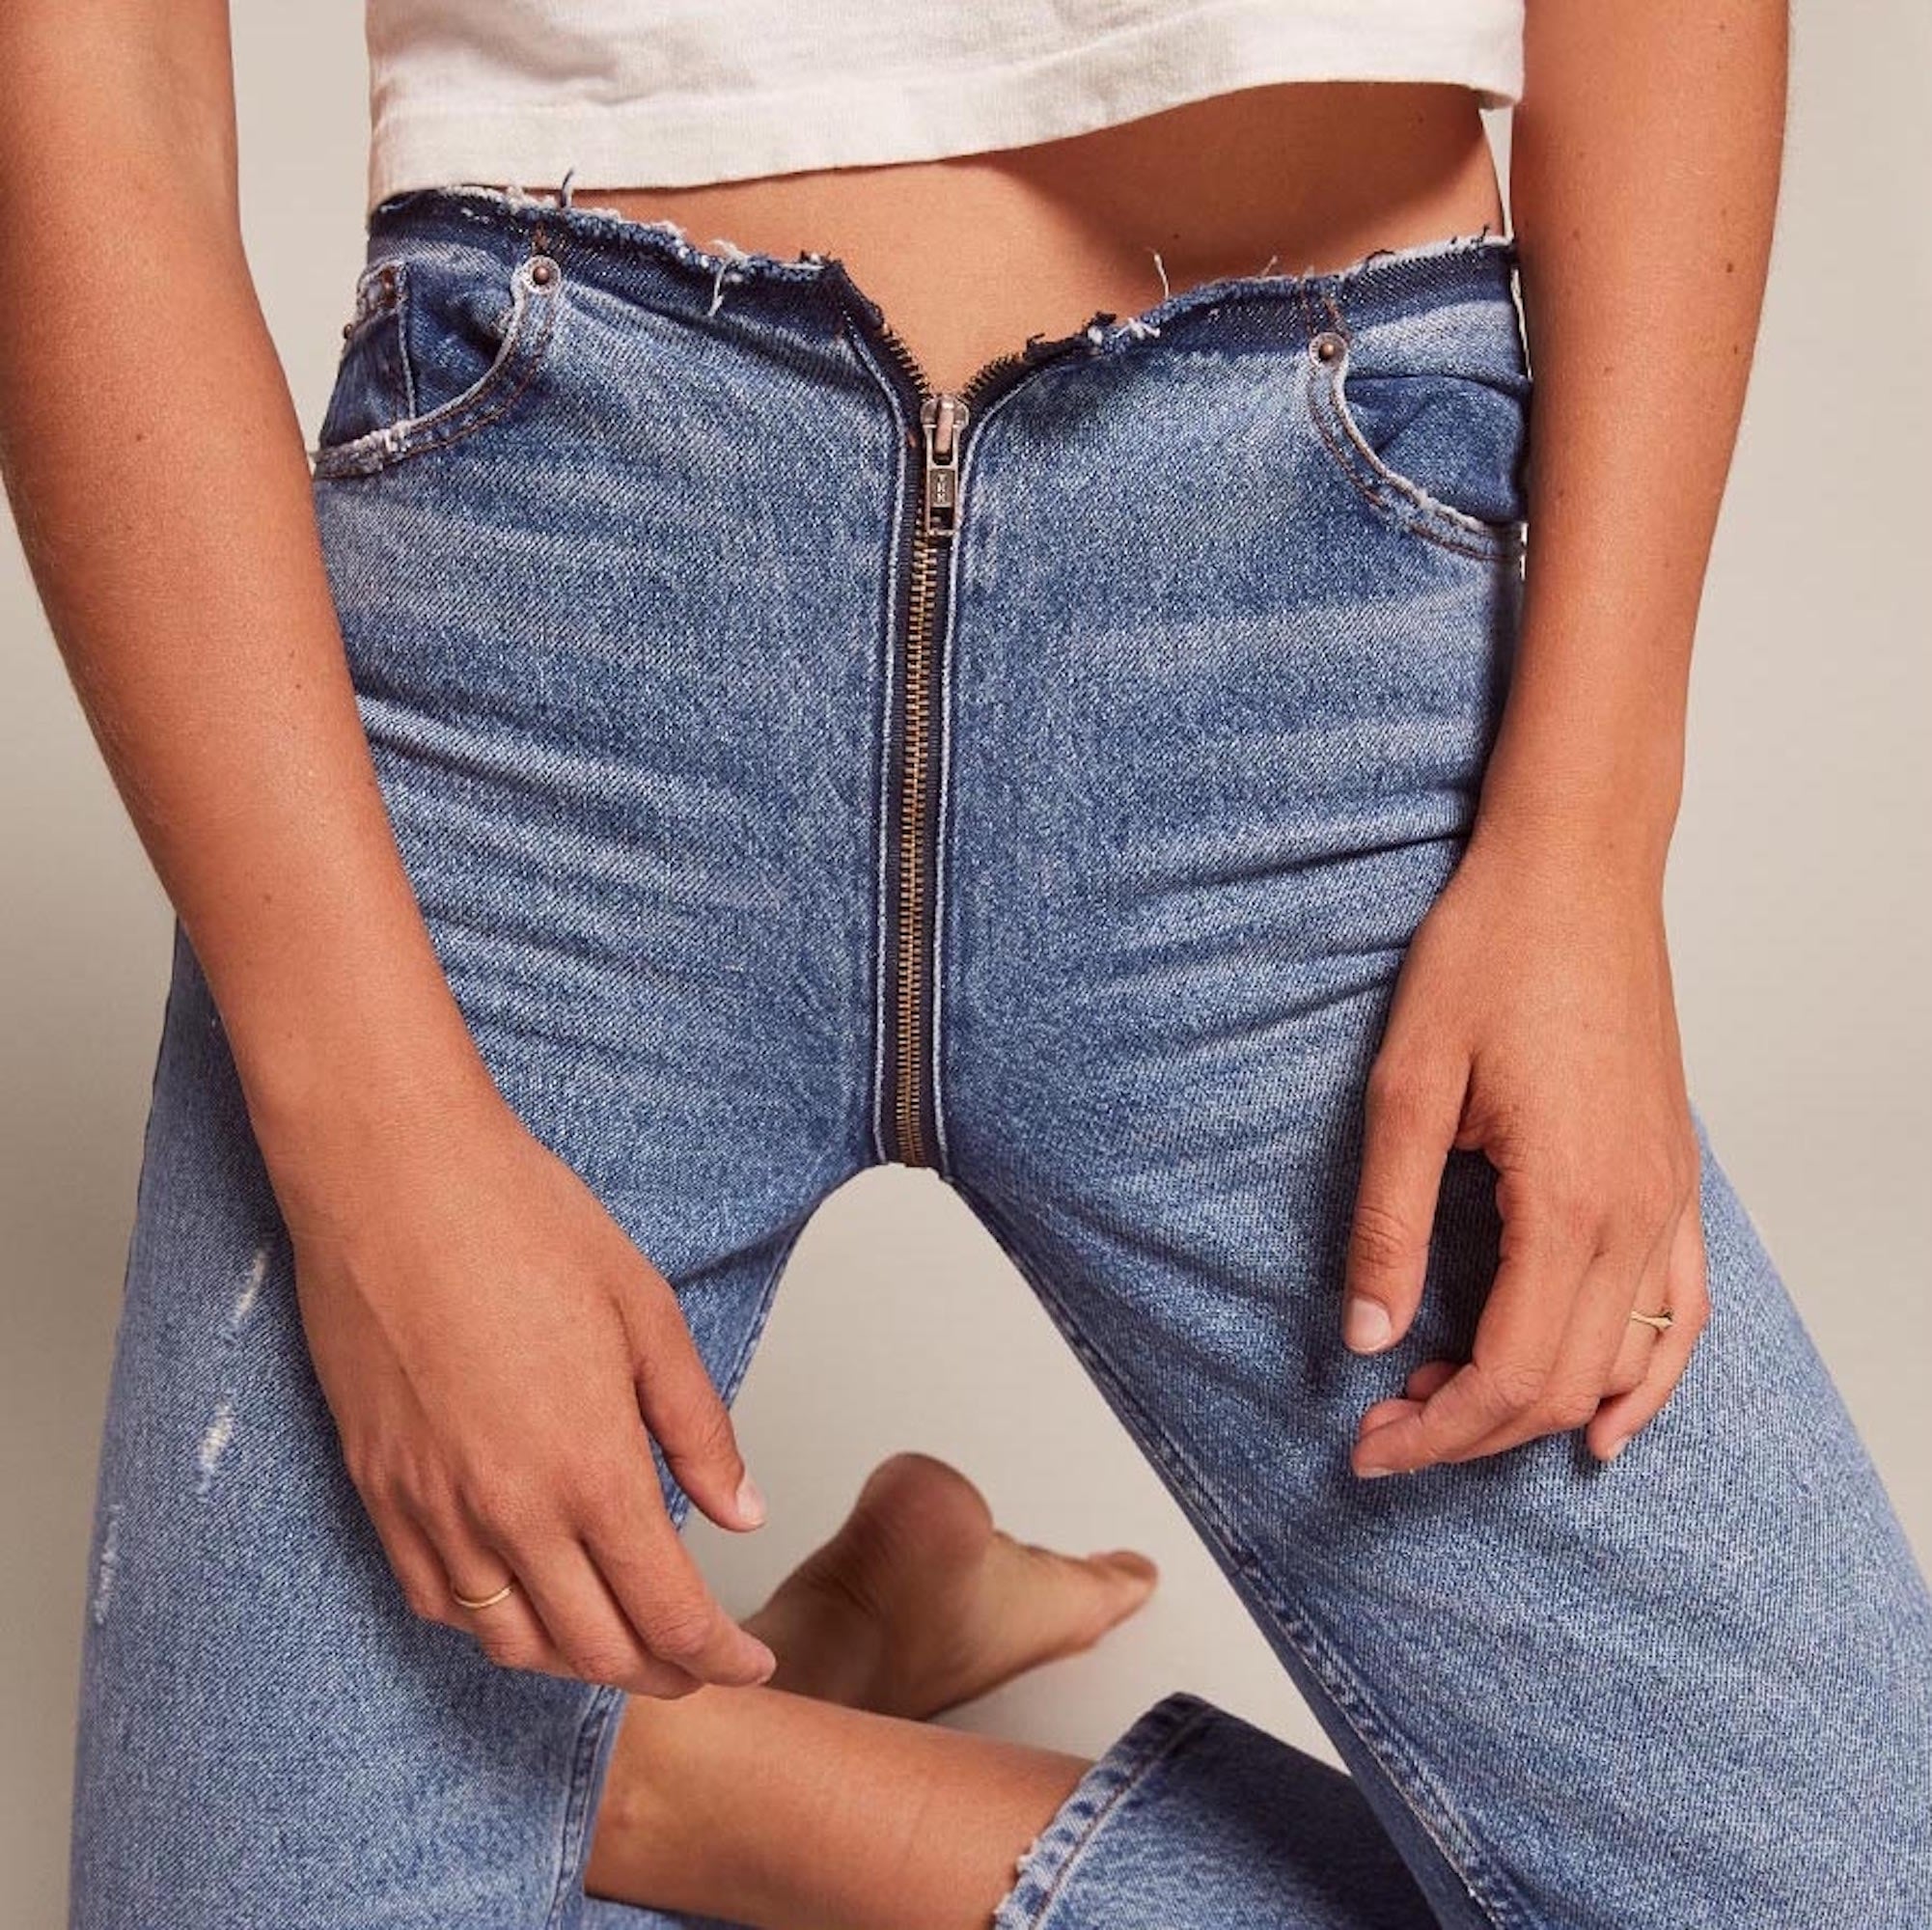 jeans with zipper from front to back